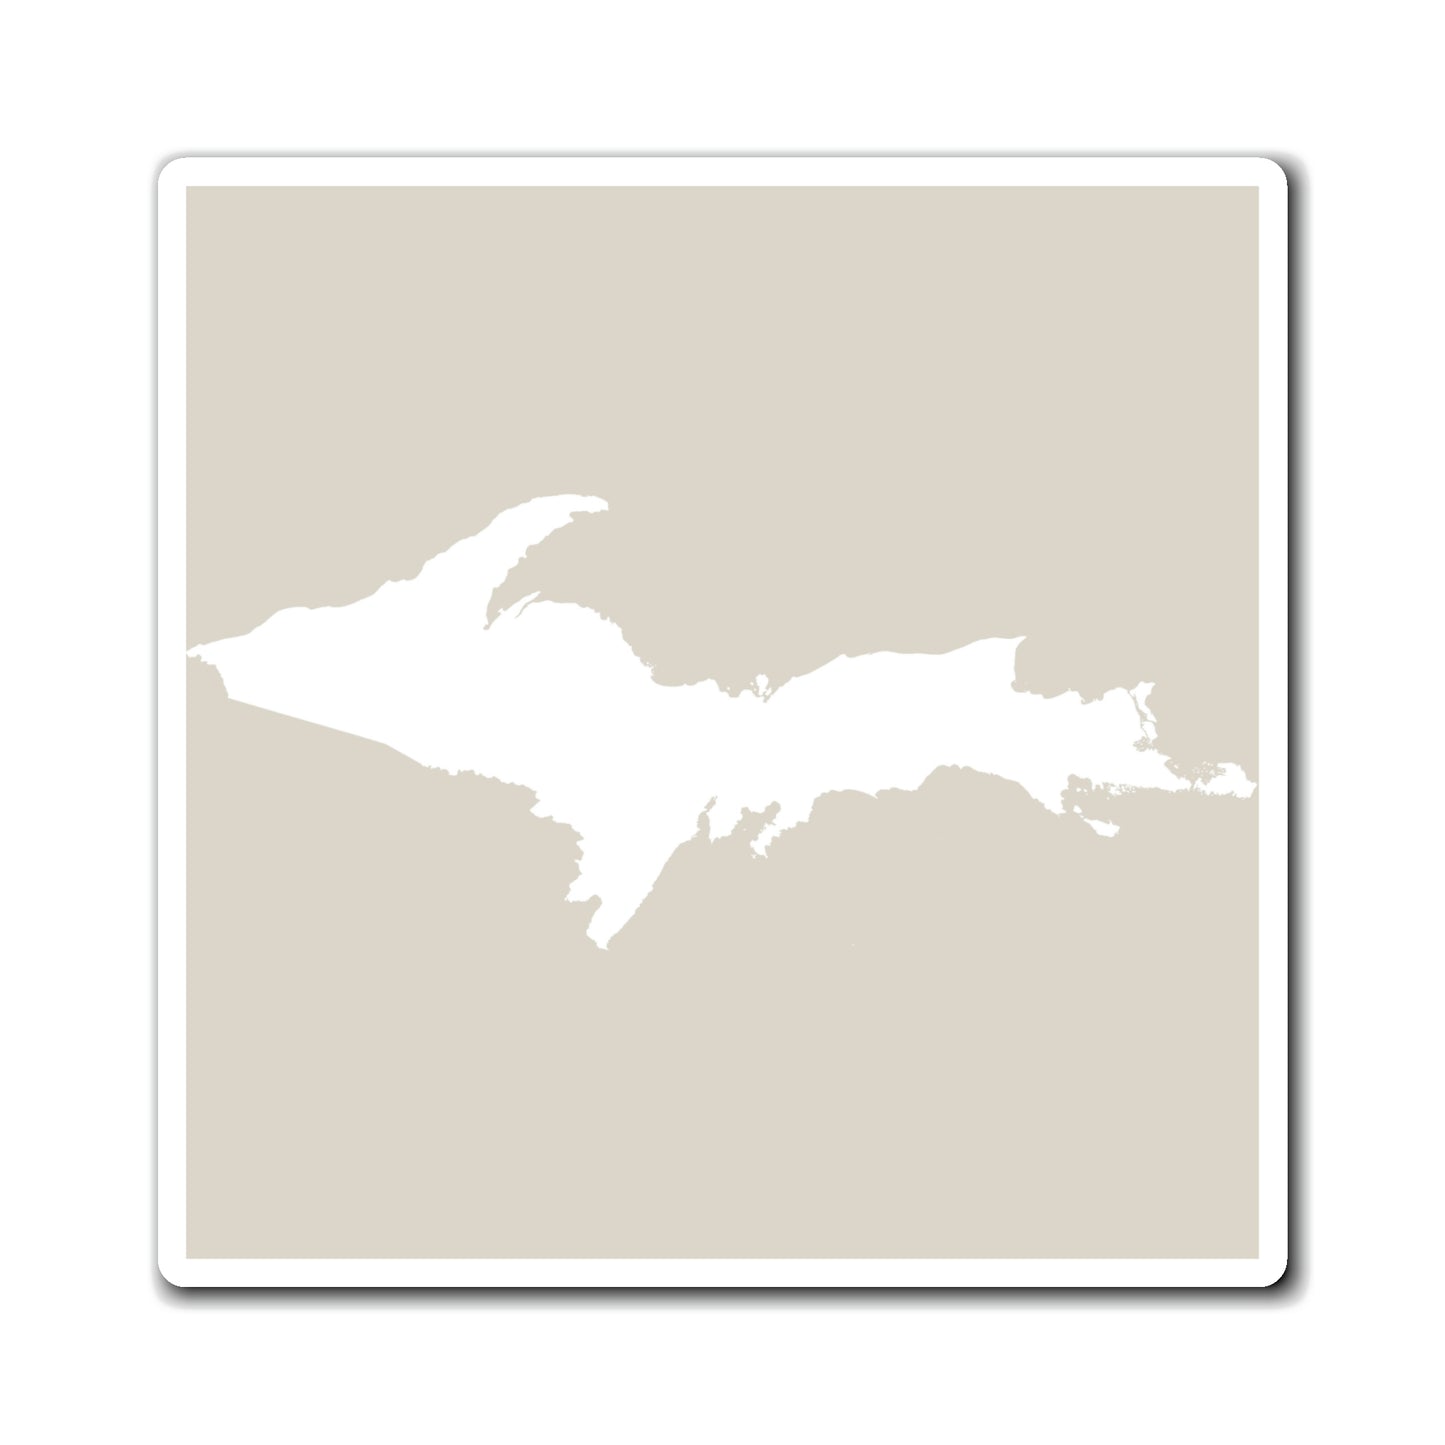 Michigan Upper Peninsula Square Magnet (Canvas Color w/ UP Outline)